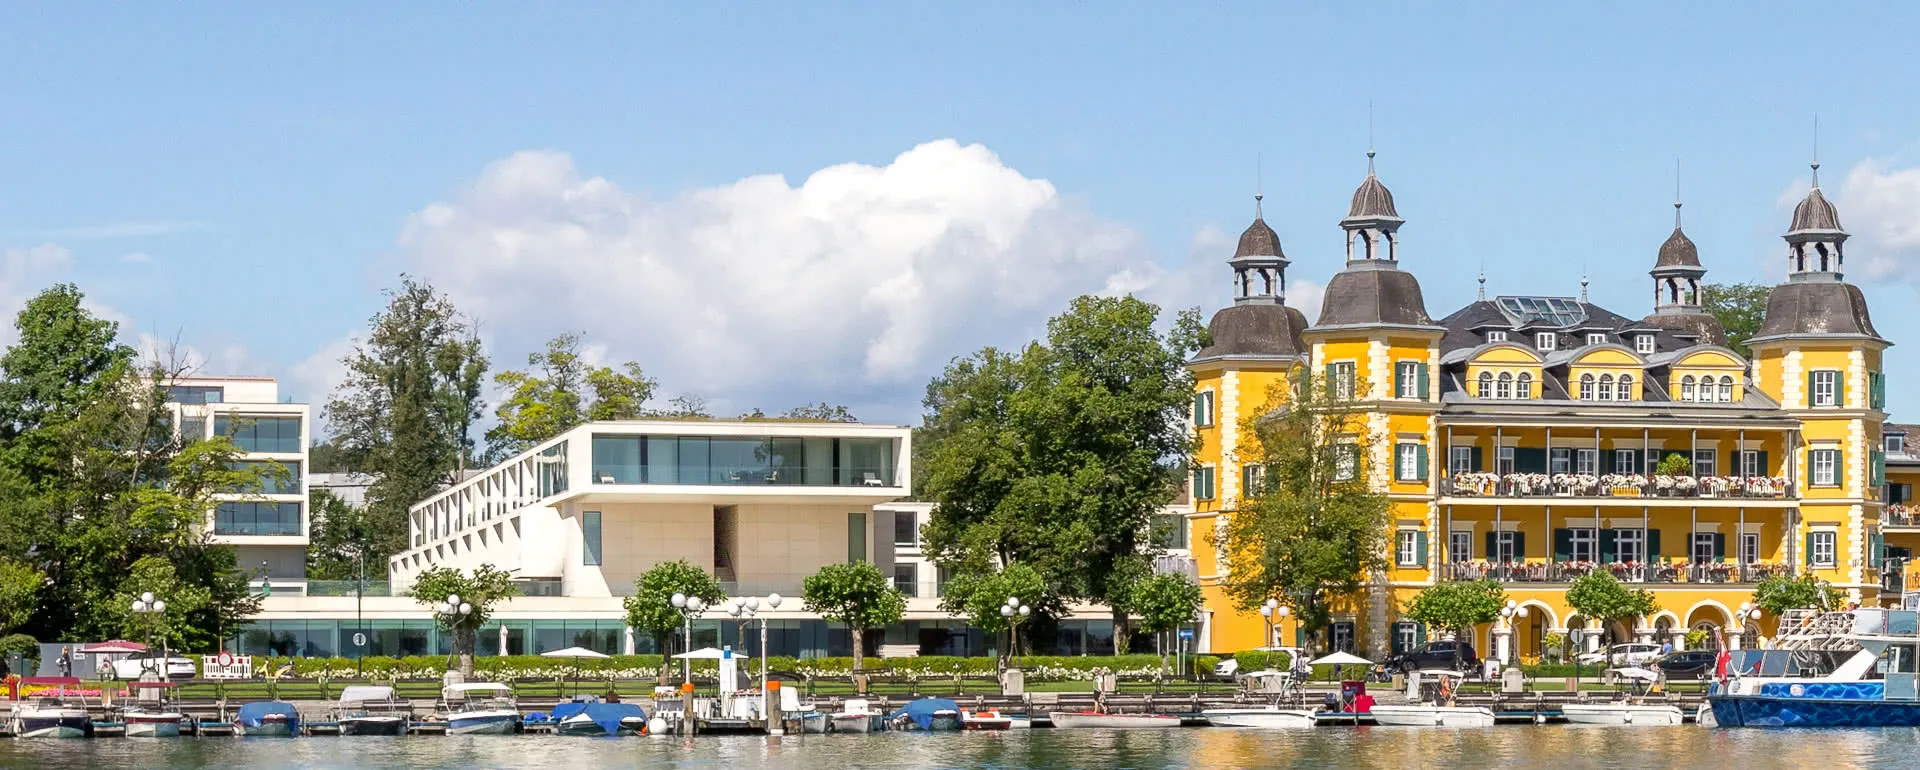 Velden am Wörthersee - the destination with youth hostels